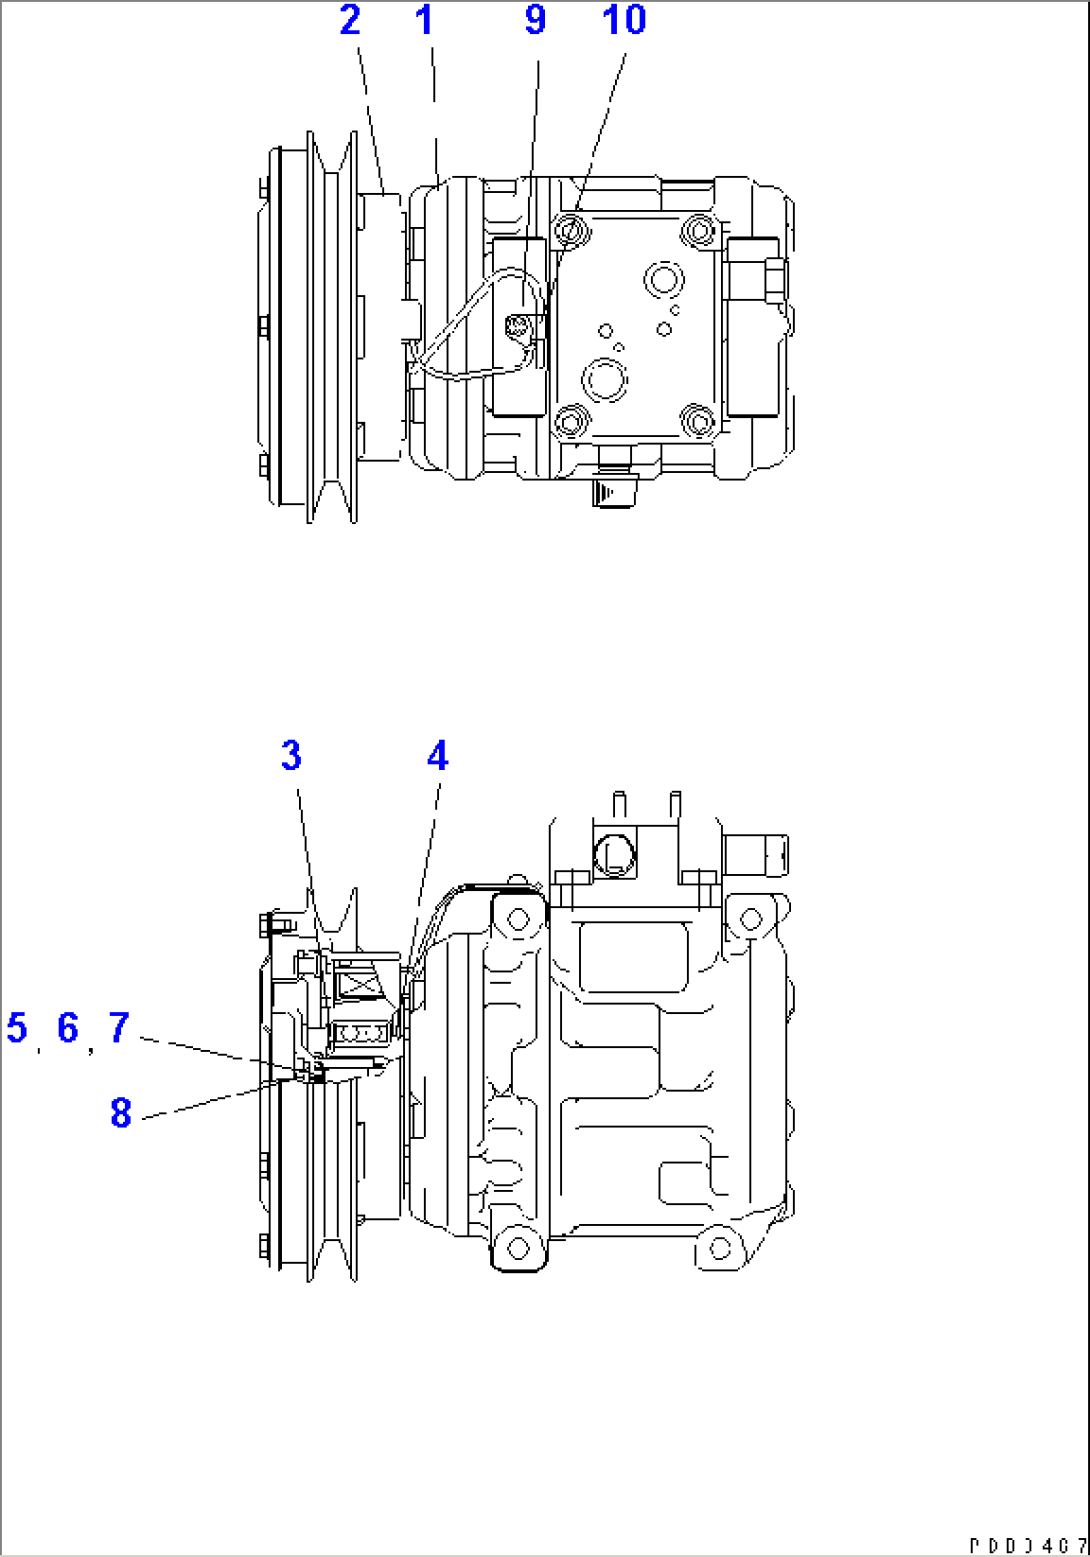 AIR COMPRESSOR (FOR SAND DUST)(#57001-58409)